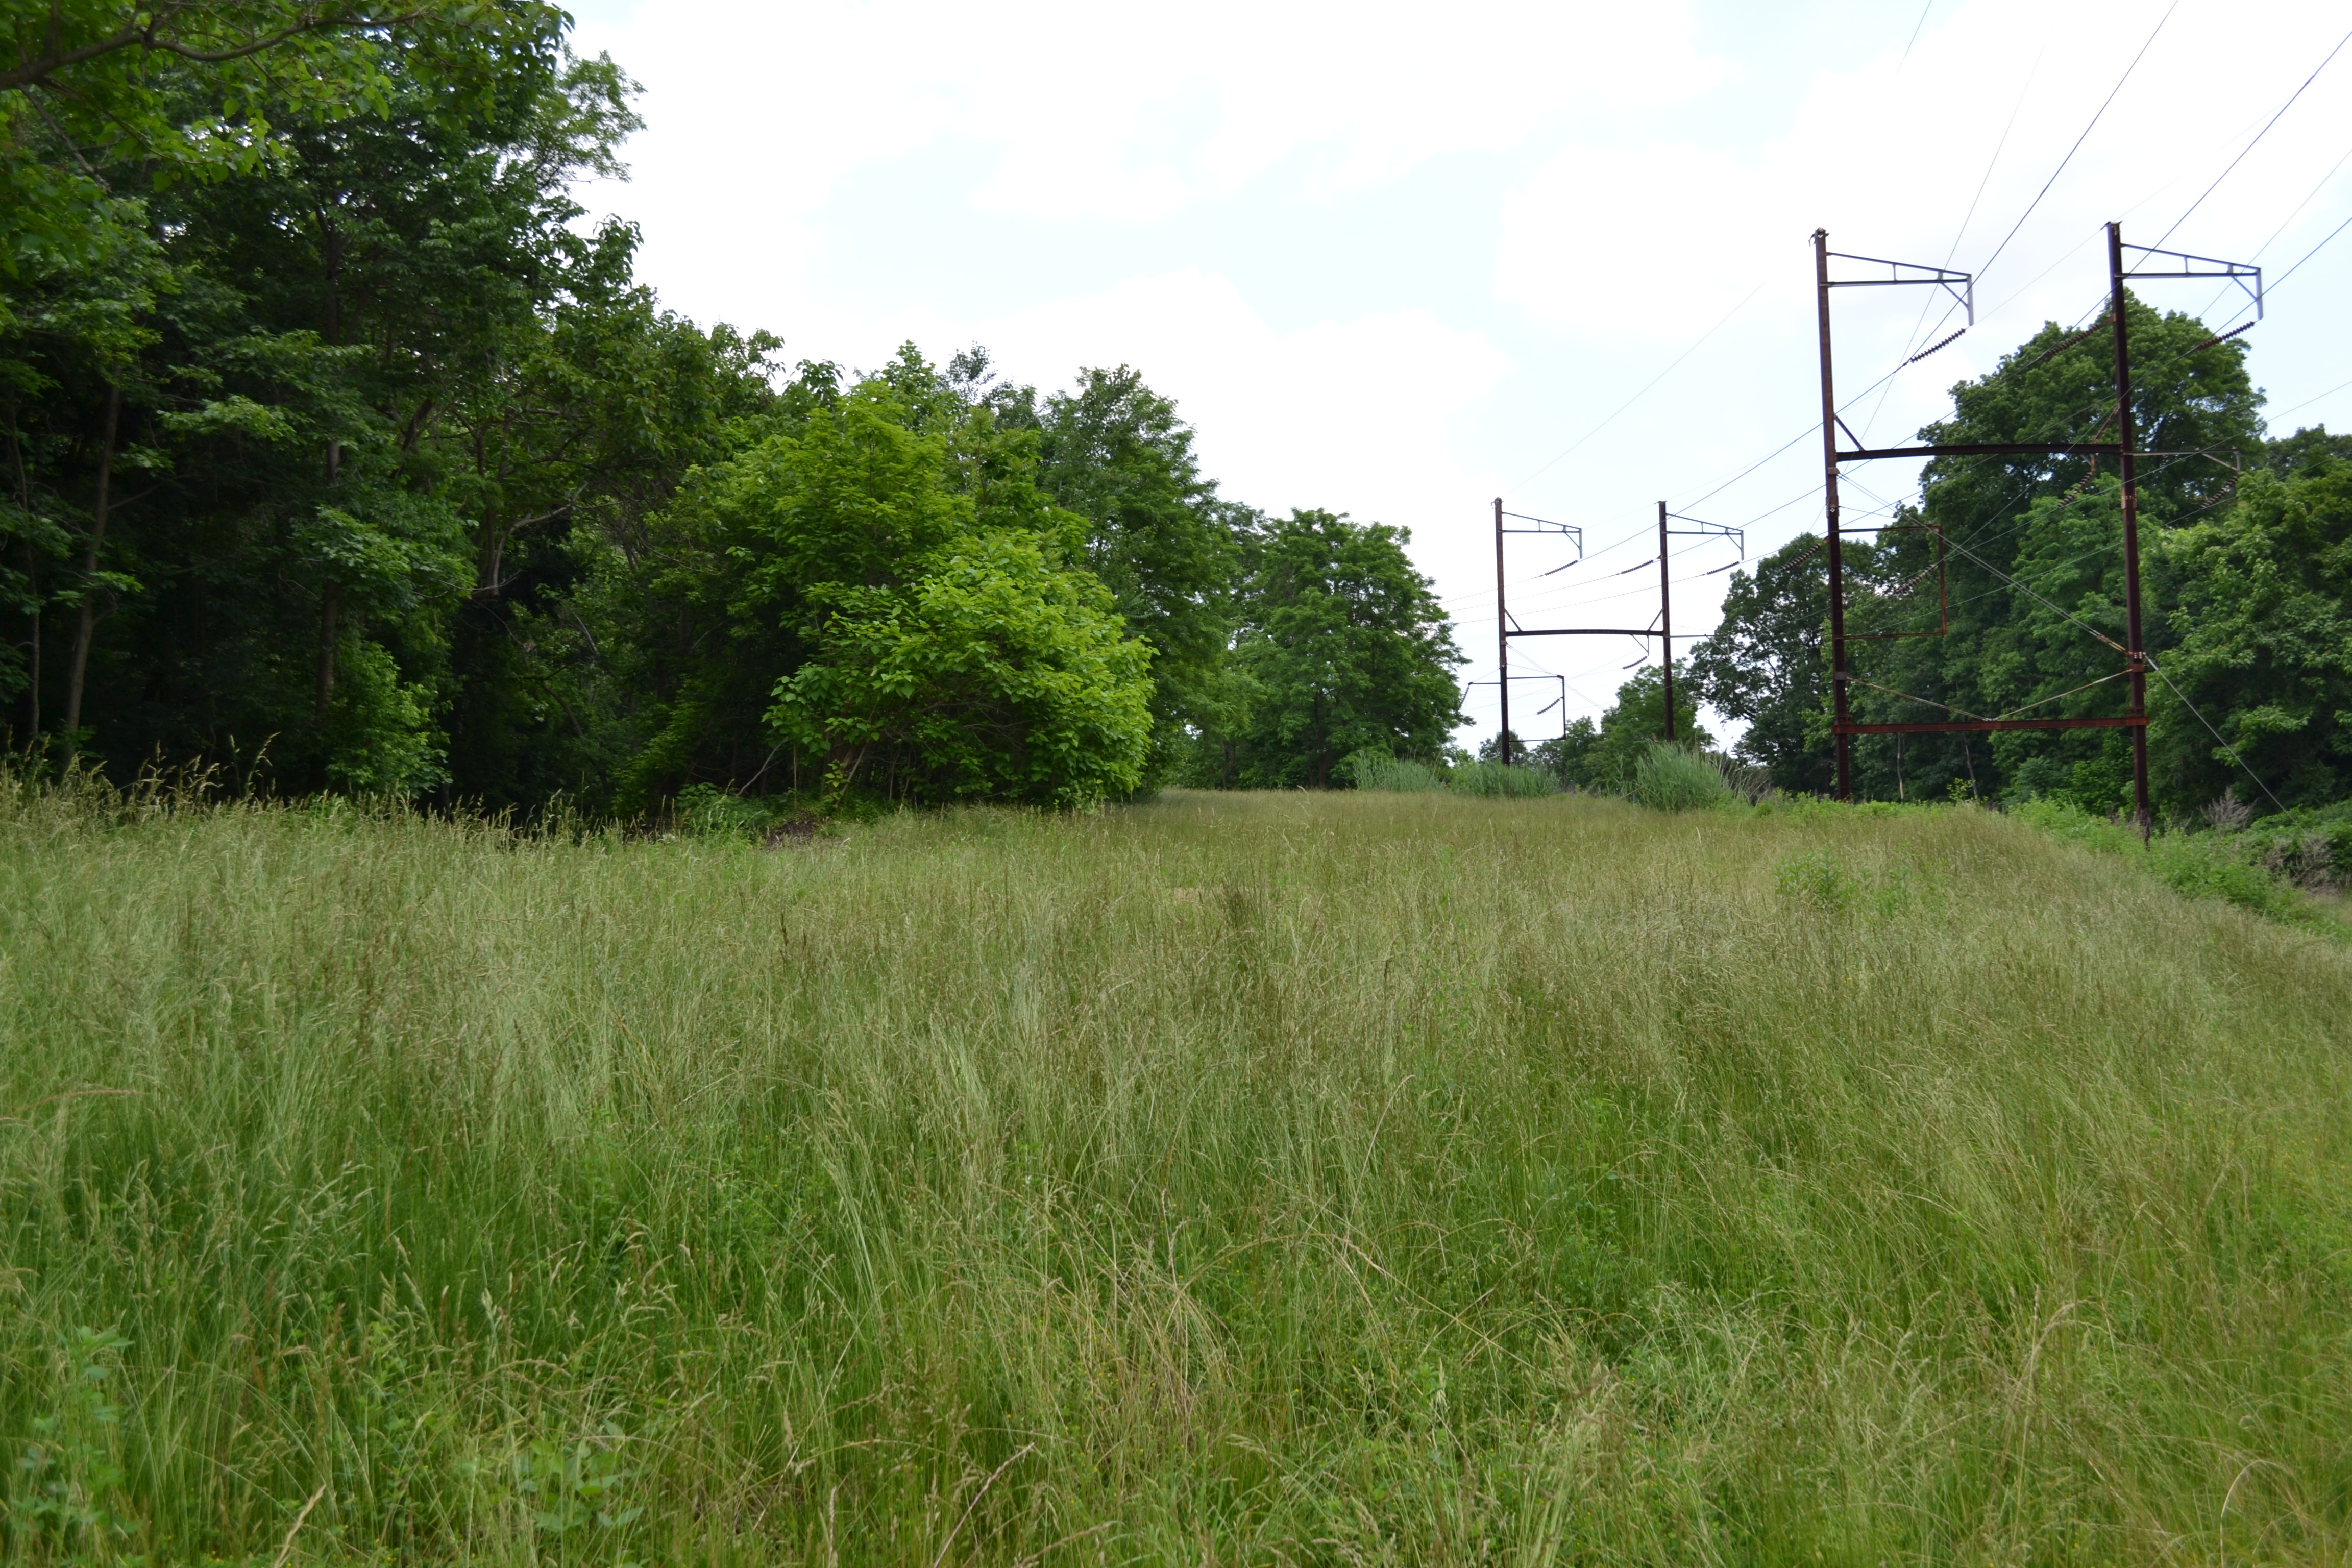 Much of the trail is planted with tall meadow grass